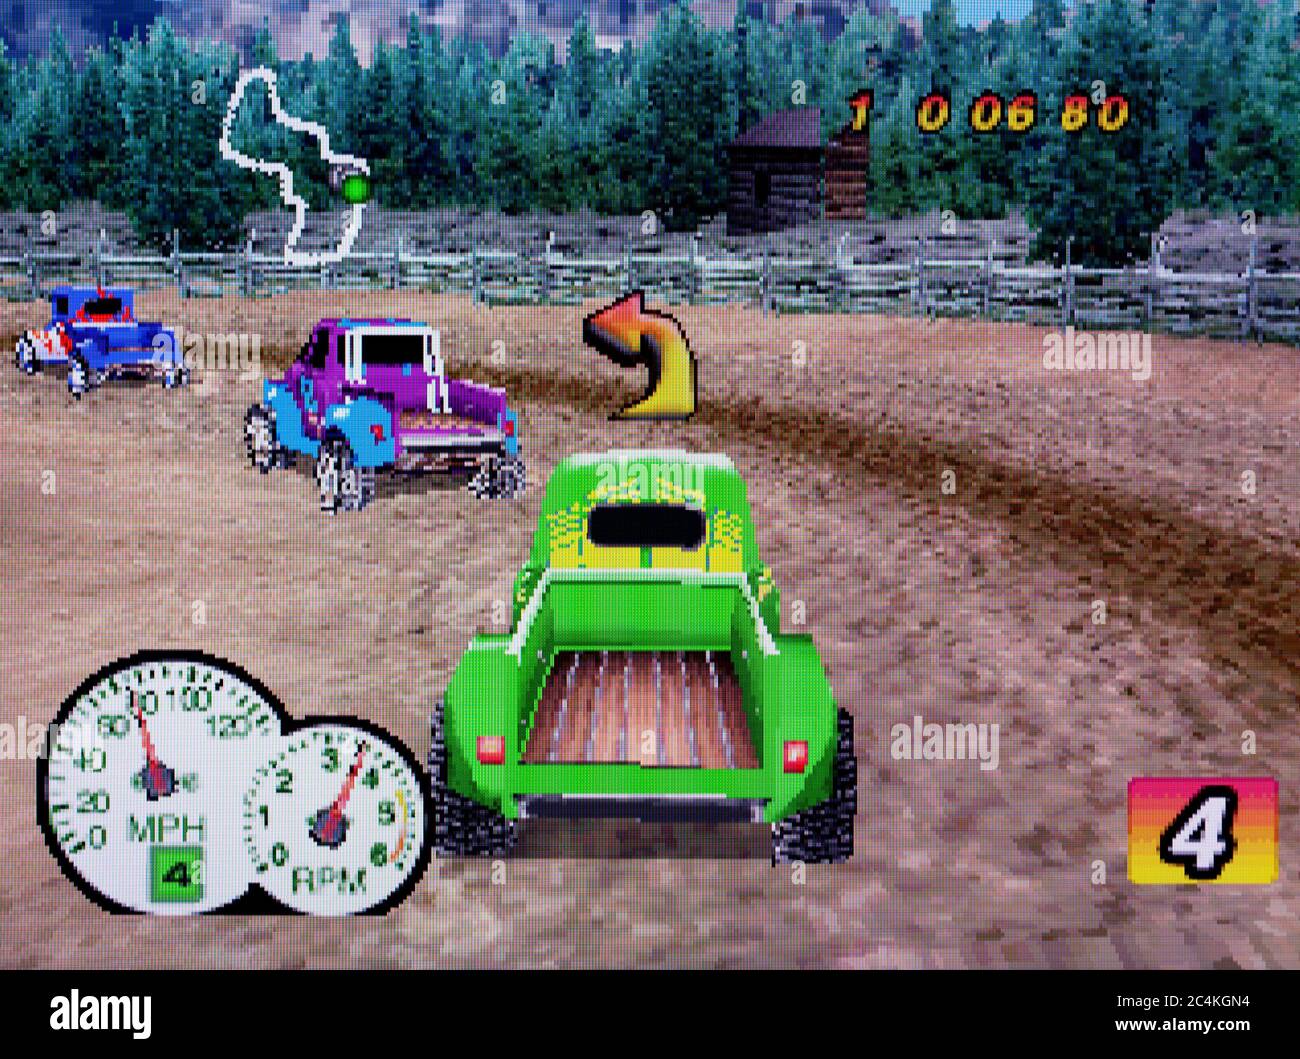 Ford Truck Mania - Sony Playstation 1 PS1 PSX - Editorial use only Stock Photo